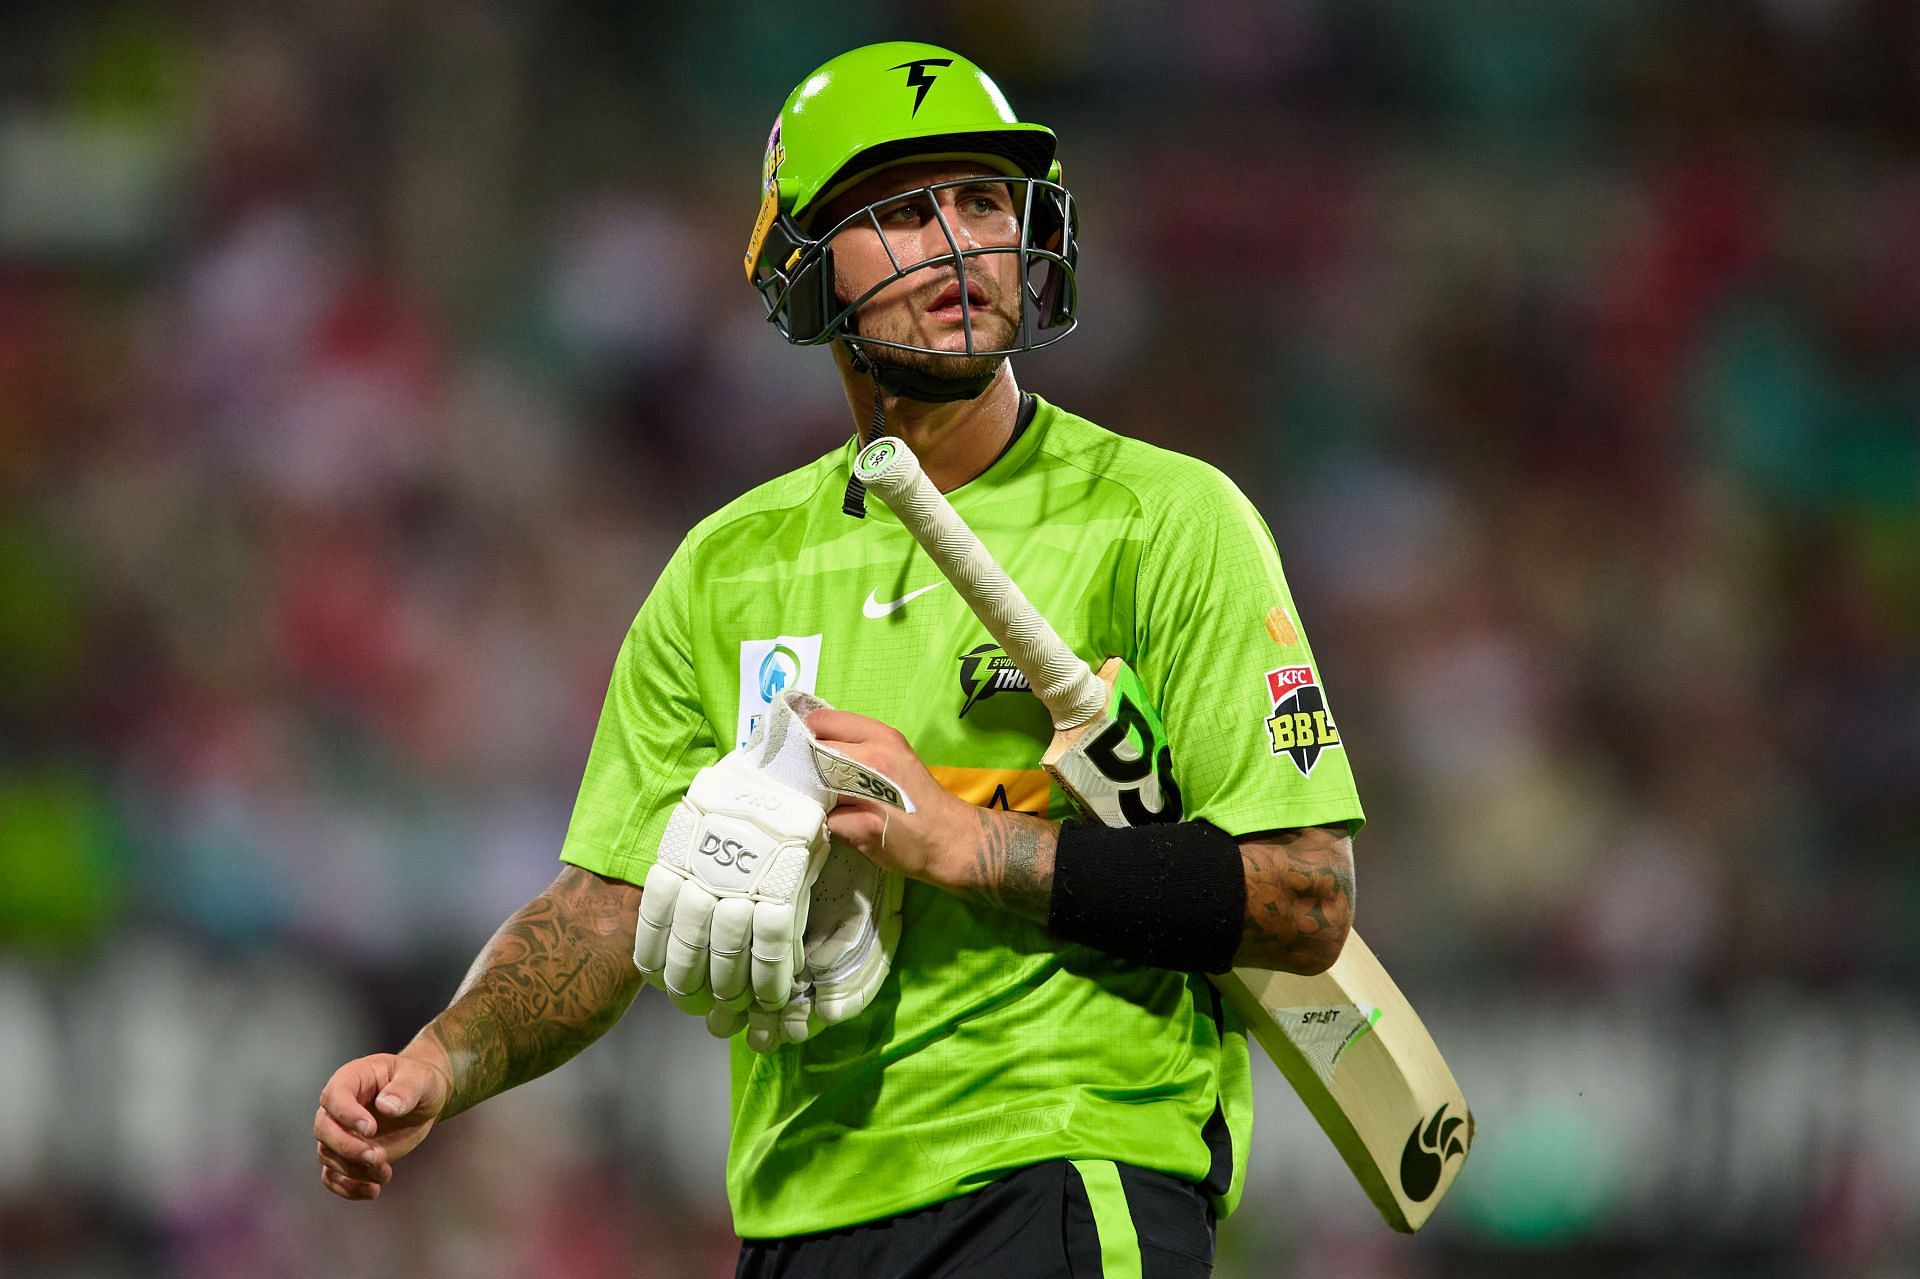 Alex Hales represents Nottinghamshire in the Vitality T20 Blast 2022 (Image courtesy: Getty Images)